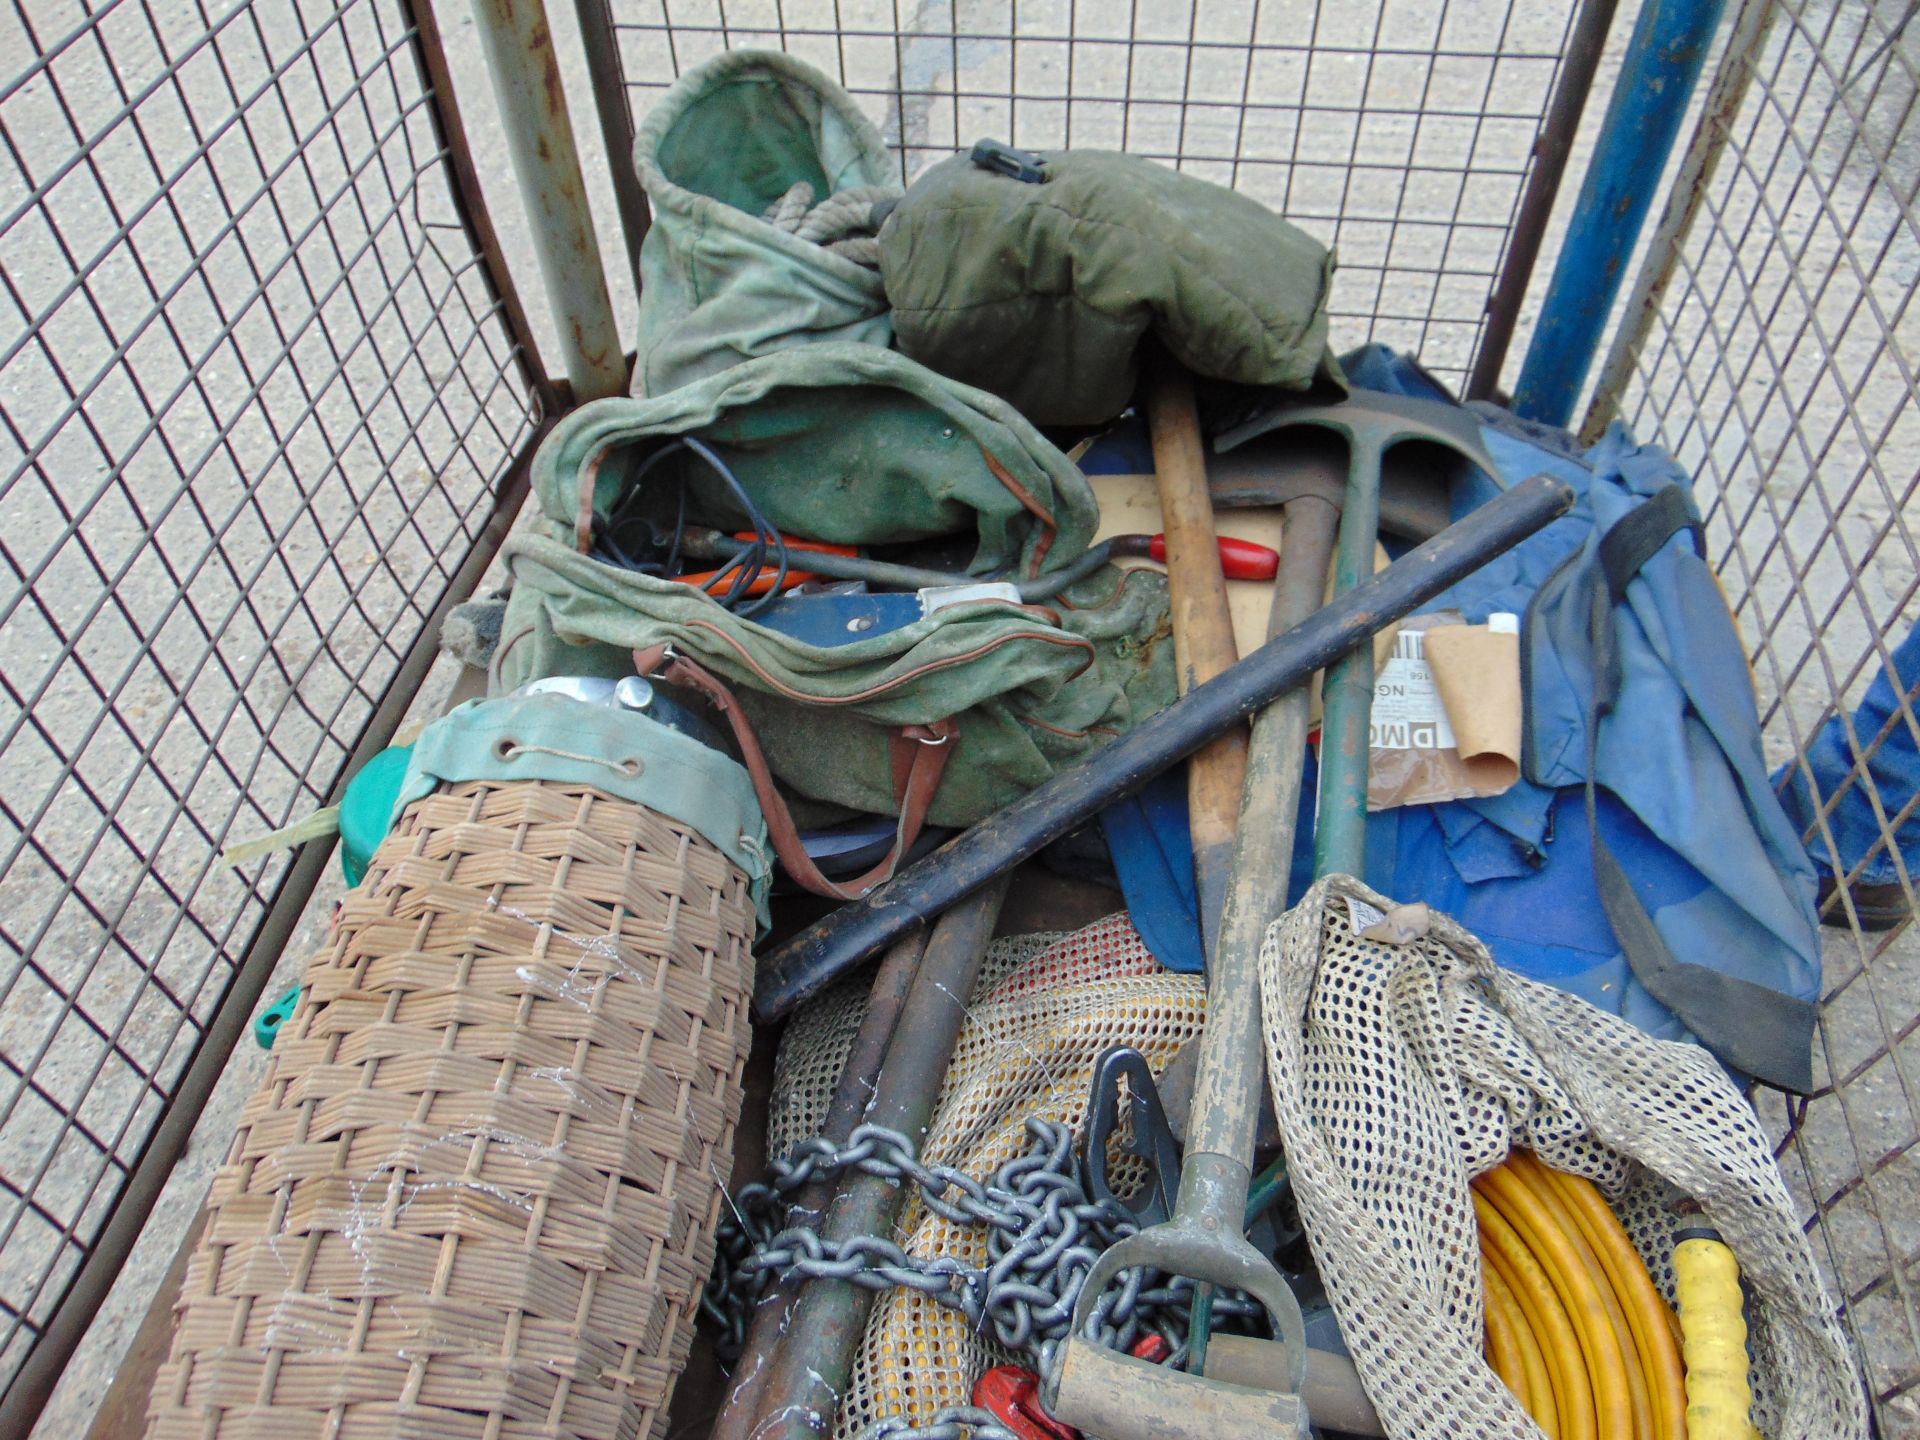 1 x Stillage of Green Goddess Fire Equipment inc Tools, Fire Axes Chains Etc - Image 3 of 10